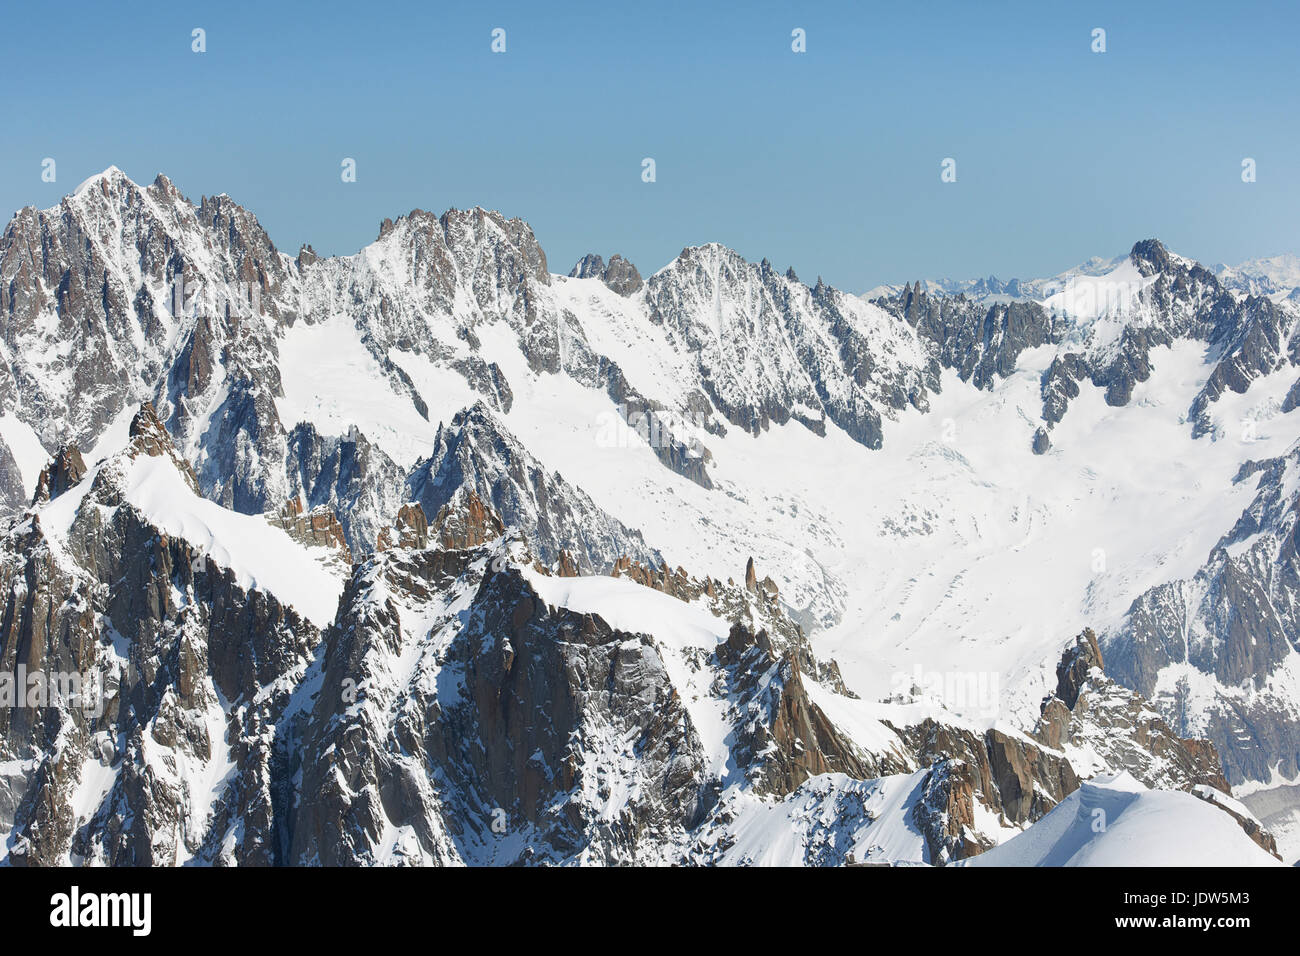 Snowy Mountain Scene, Chamonix, France Banque D'Images